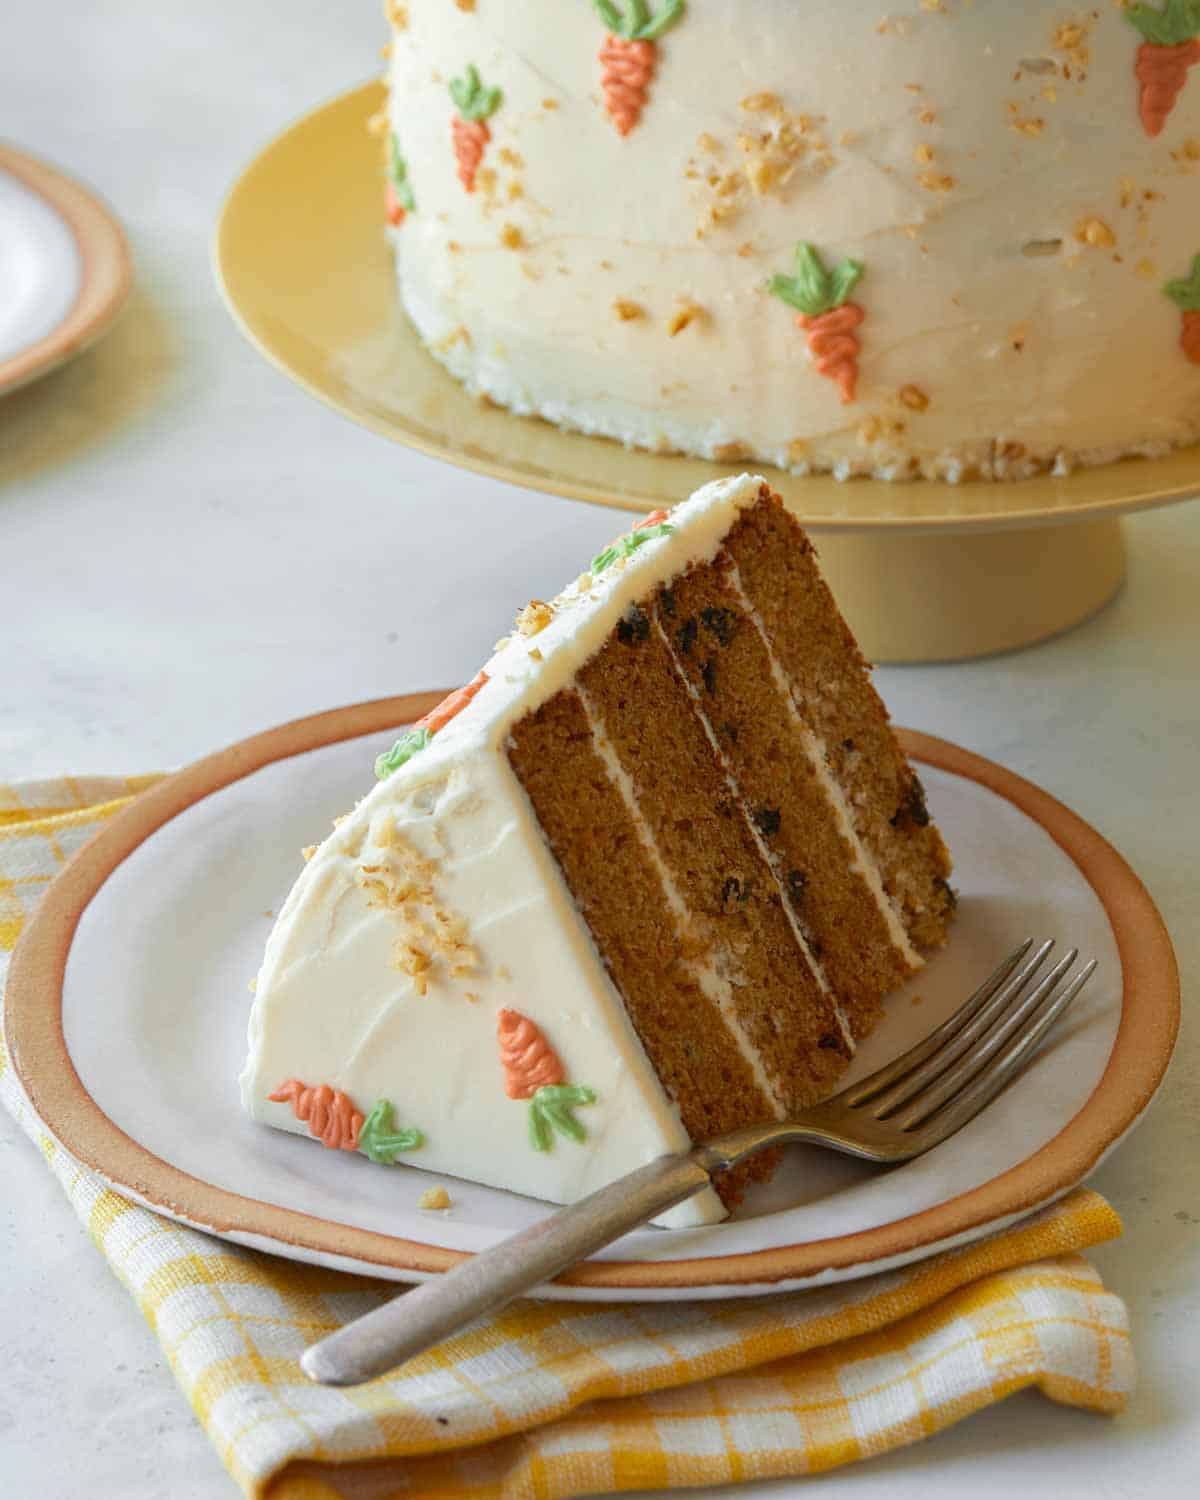 A slice of carrot cake with cream cheese frosting on a plate.